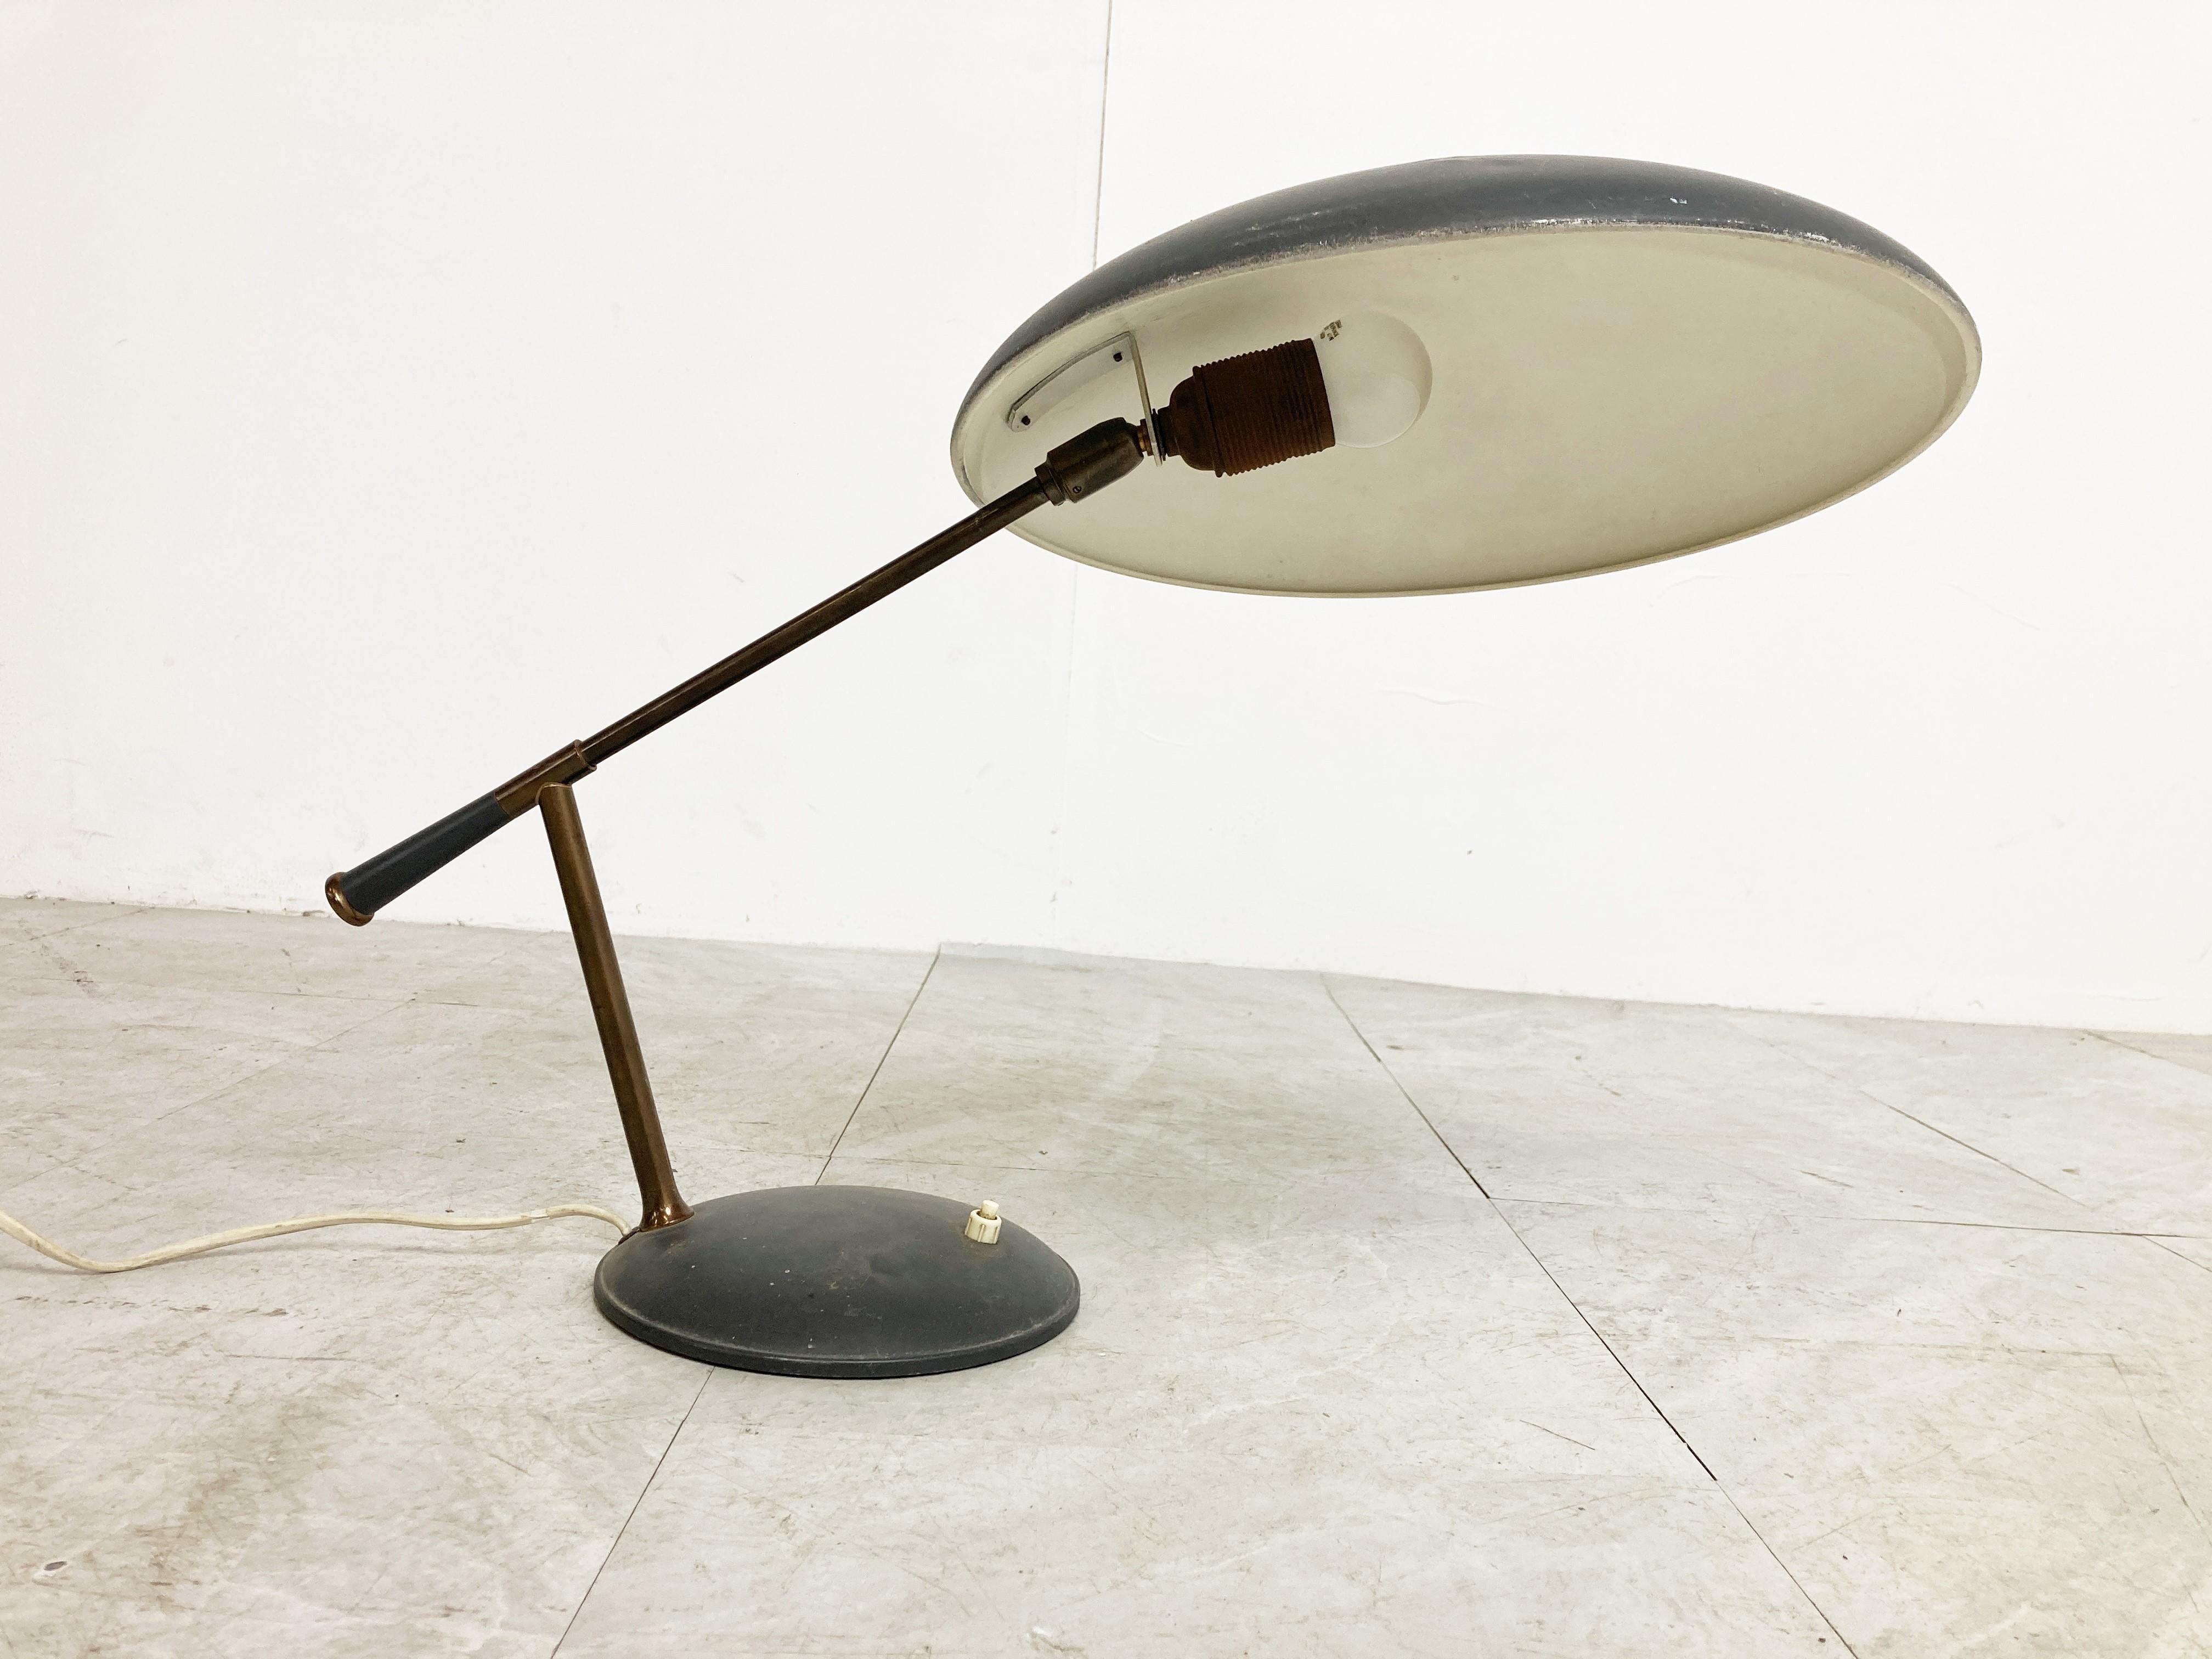 Rare desk lamp by Louis Kalff for Philips.

This midcentury table lamp has a beautiful design and is rather unique.

Louis Kalff made some famous designs like the Timor desk lamp or the 'z' shaped desk lamp.

The angle of the shade is